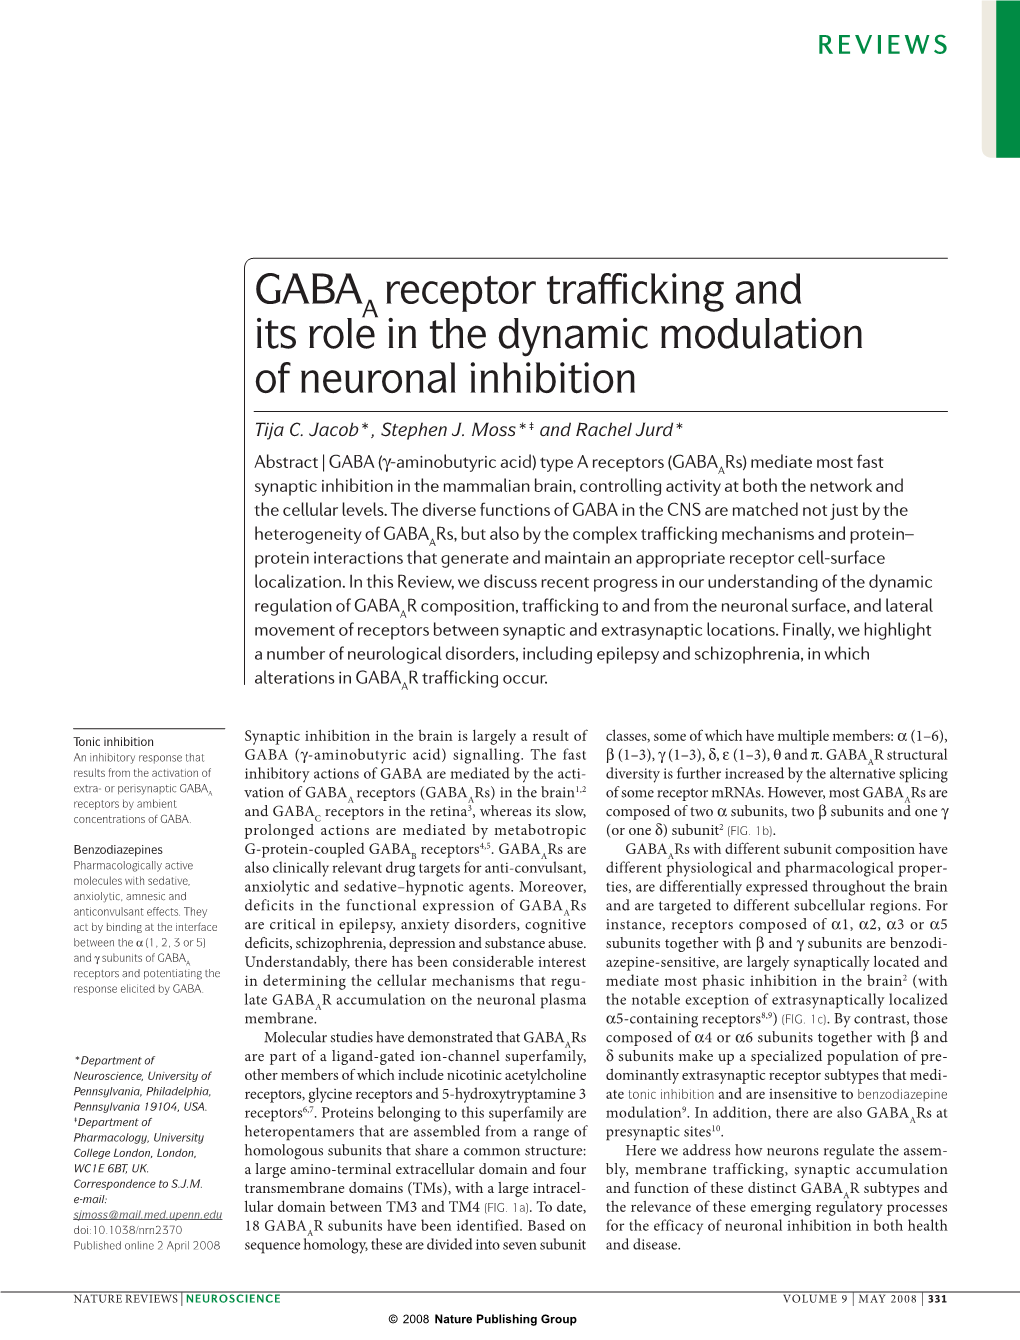 GABA Receptor Trafficking and Its Role in the Dynamic Modulation Of